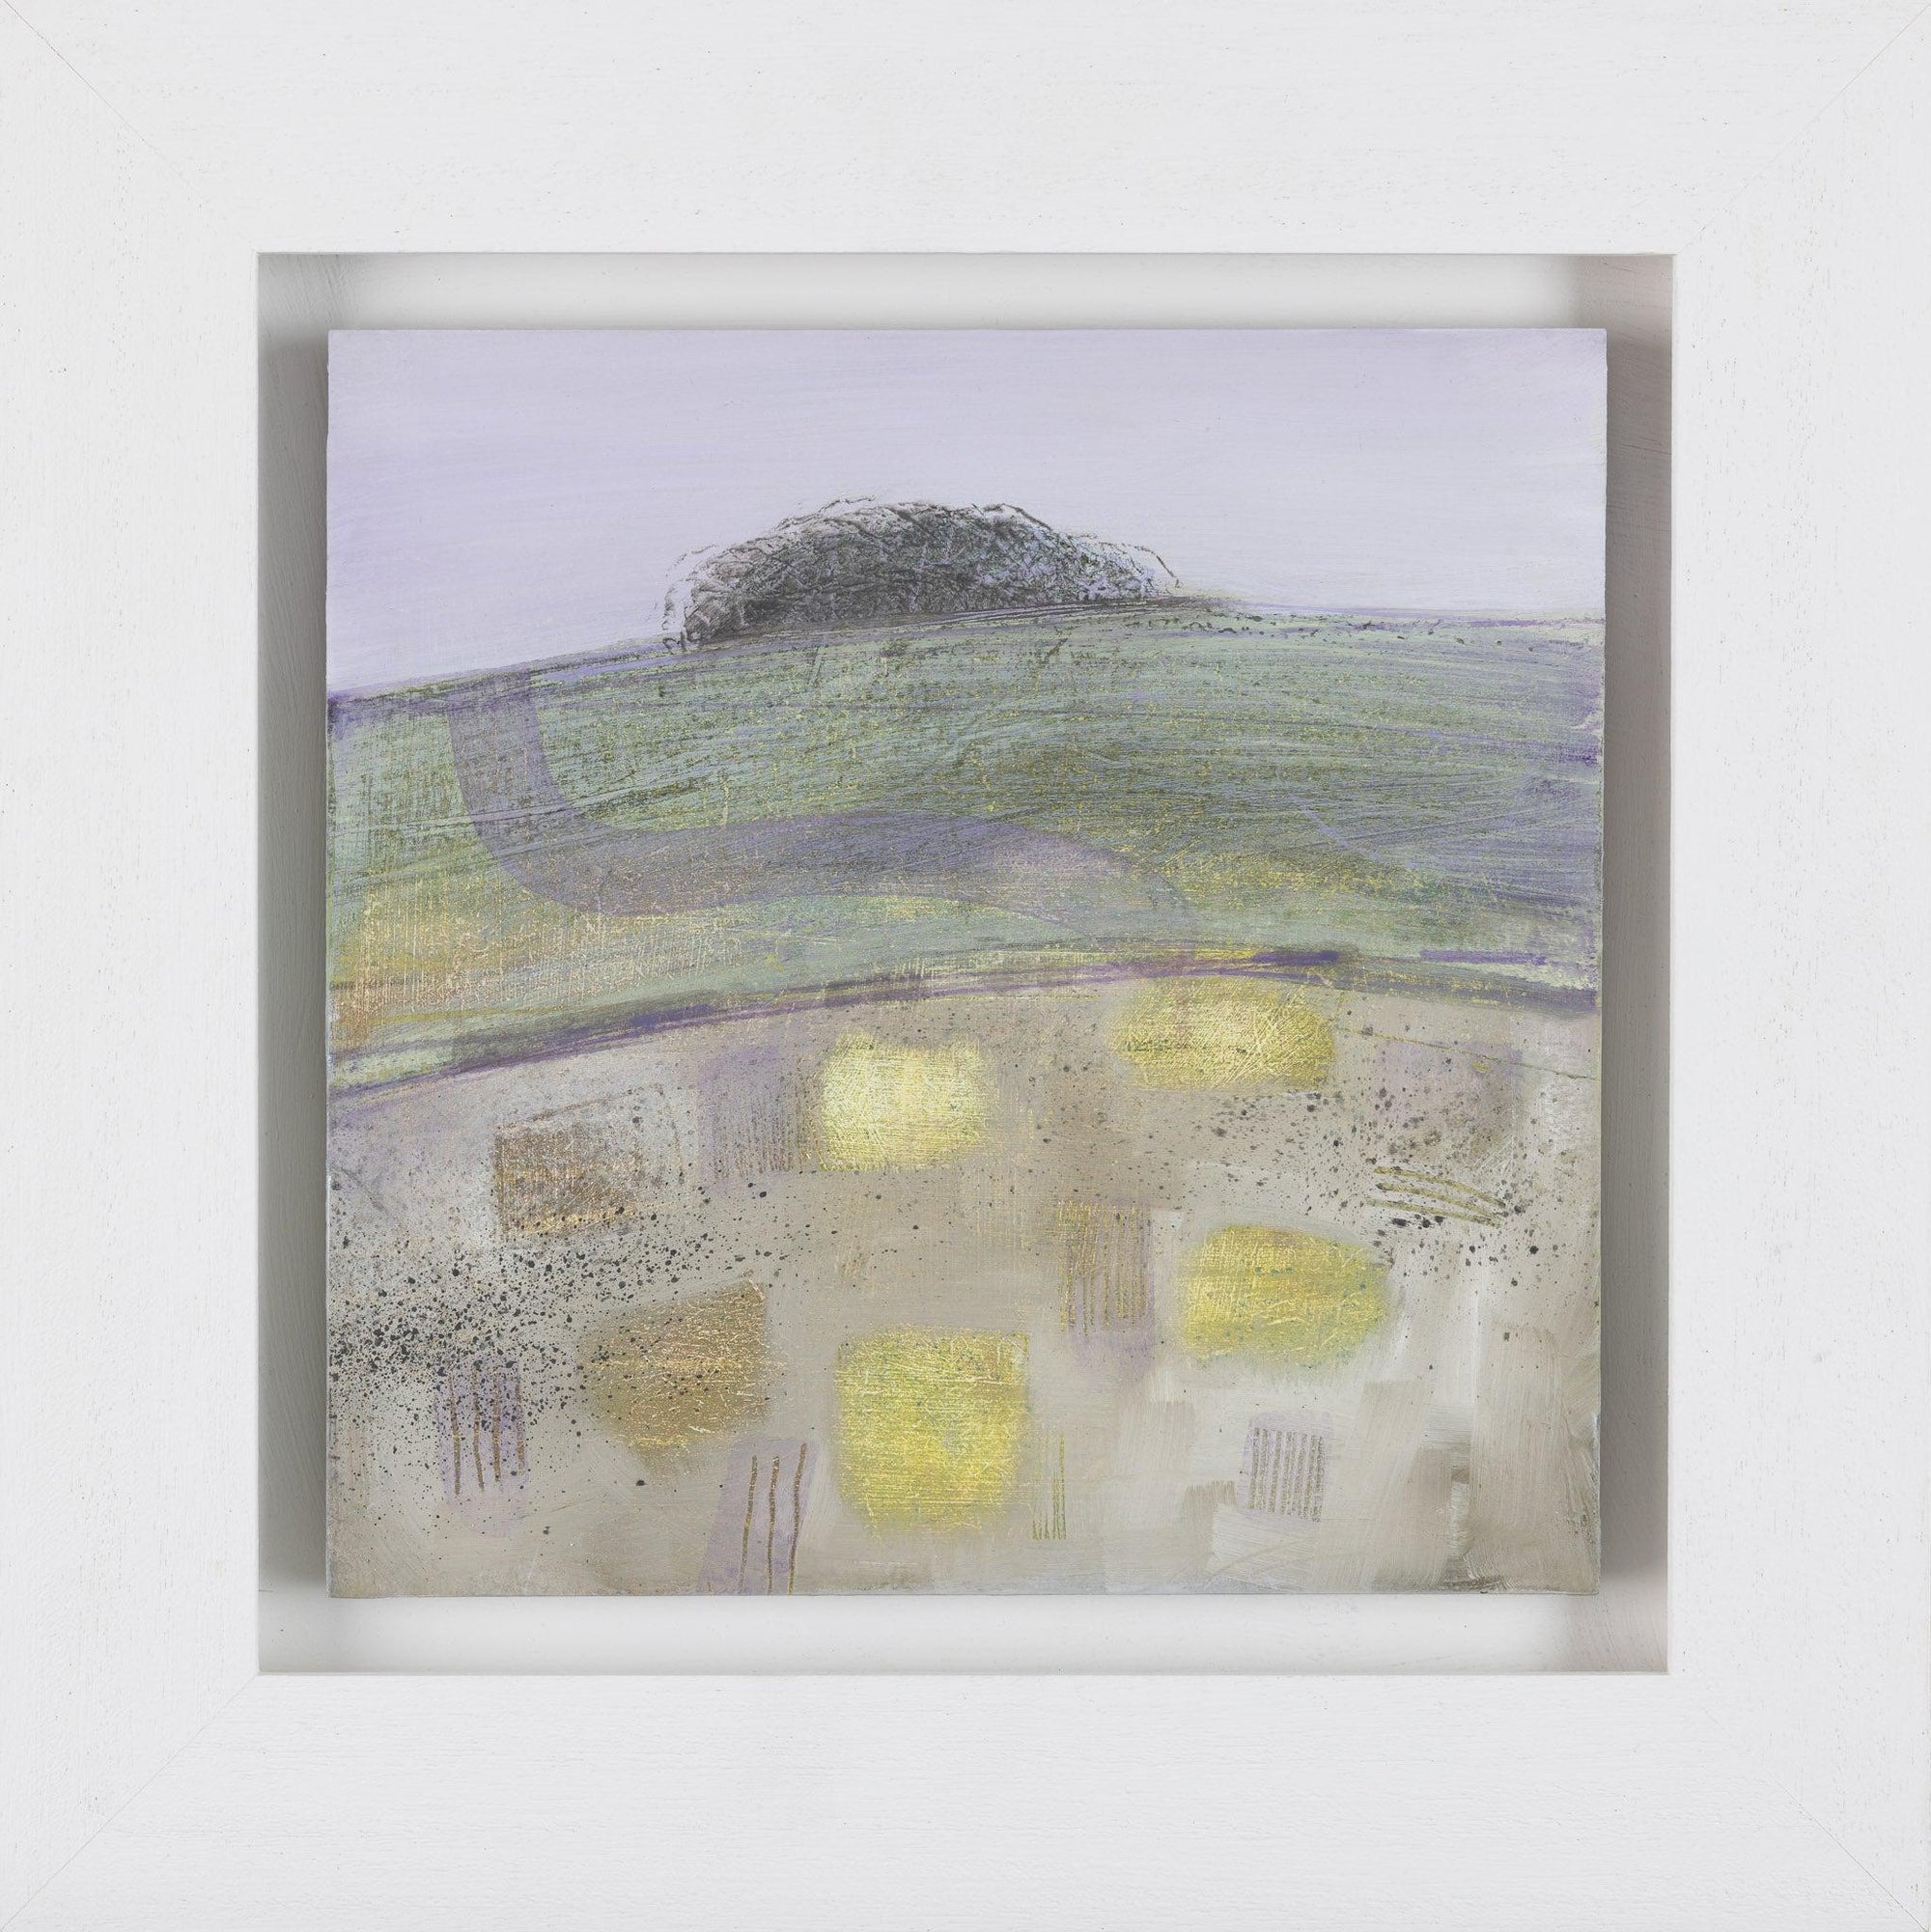 ‘The patchy field' oil on board by Ruth Taylor, available at Padstow Gallery, Cornwall